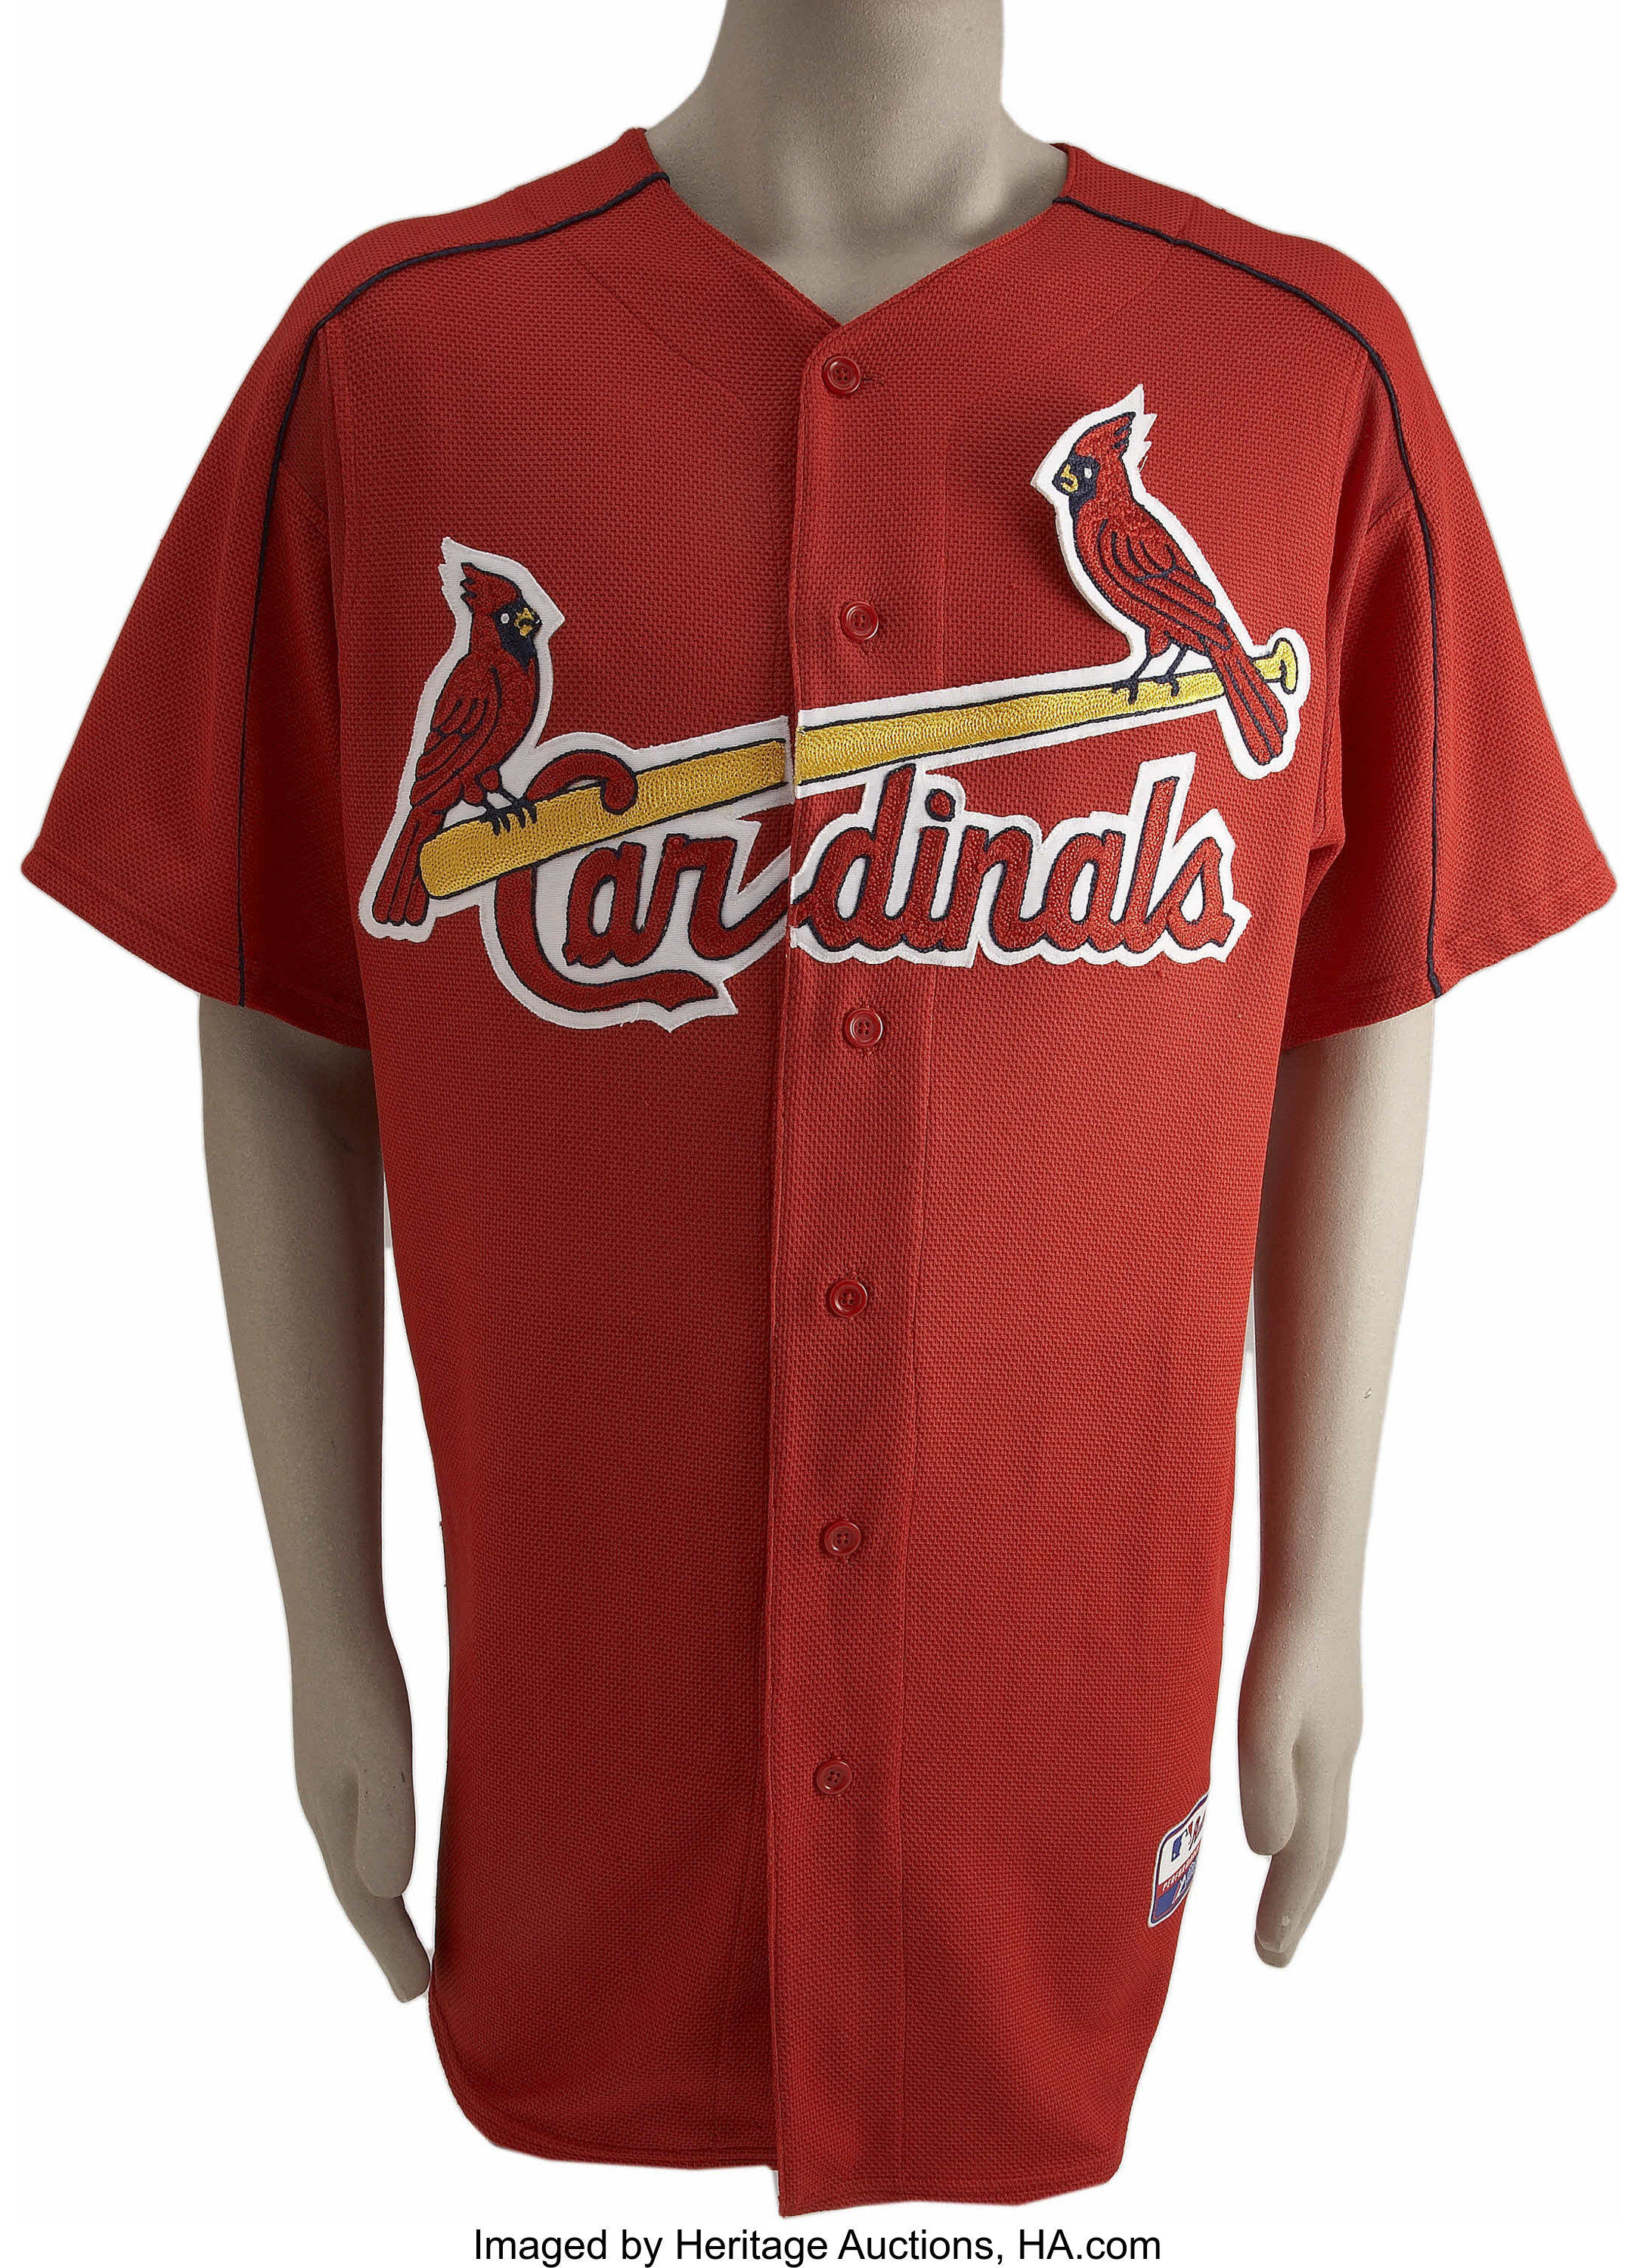 Tony LaRussa Batting Practice Worn Signed Jersey. The red Majestic